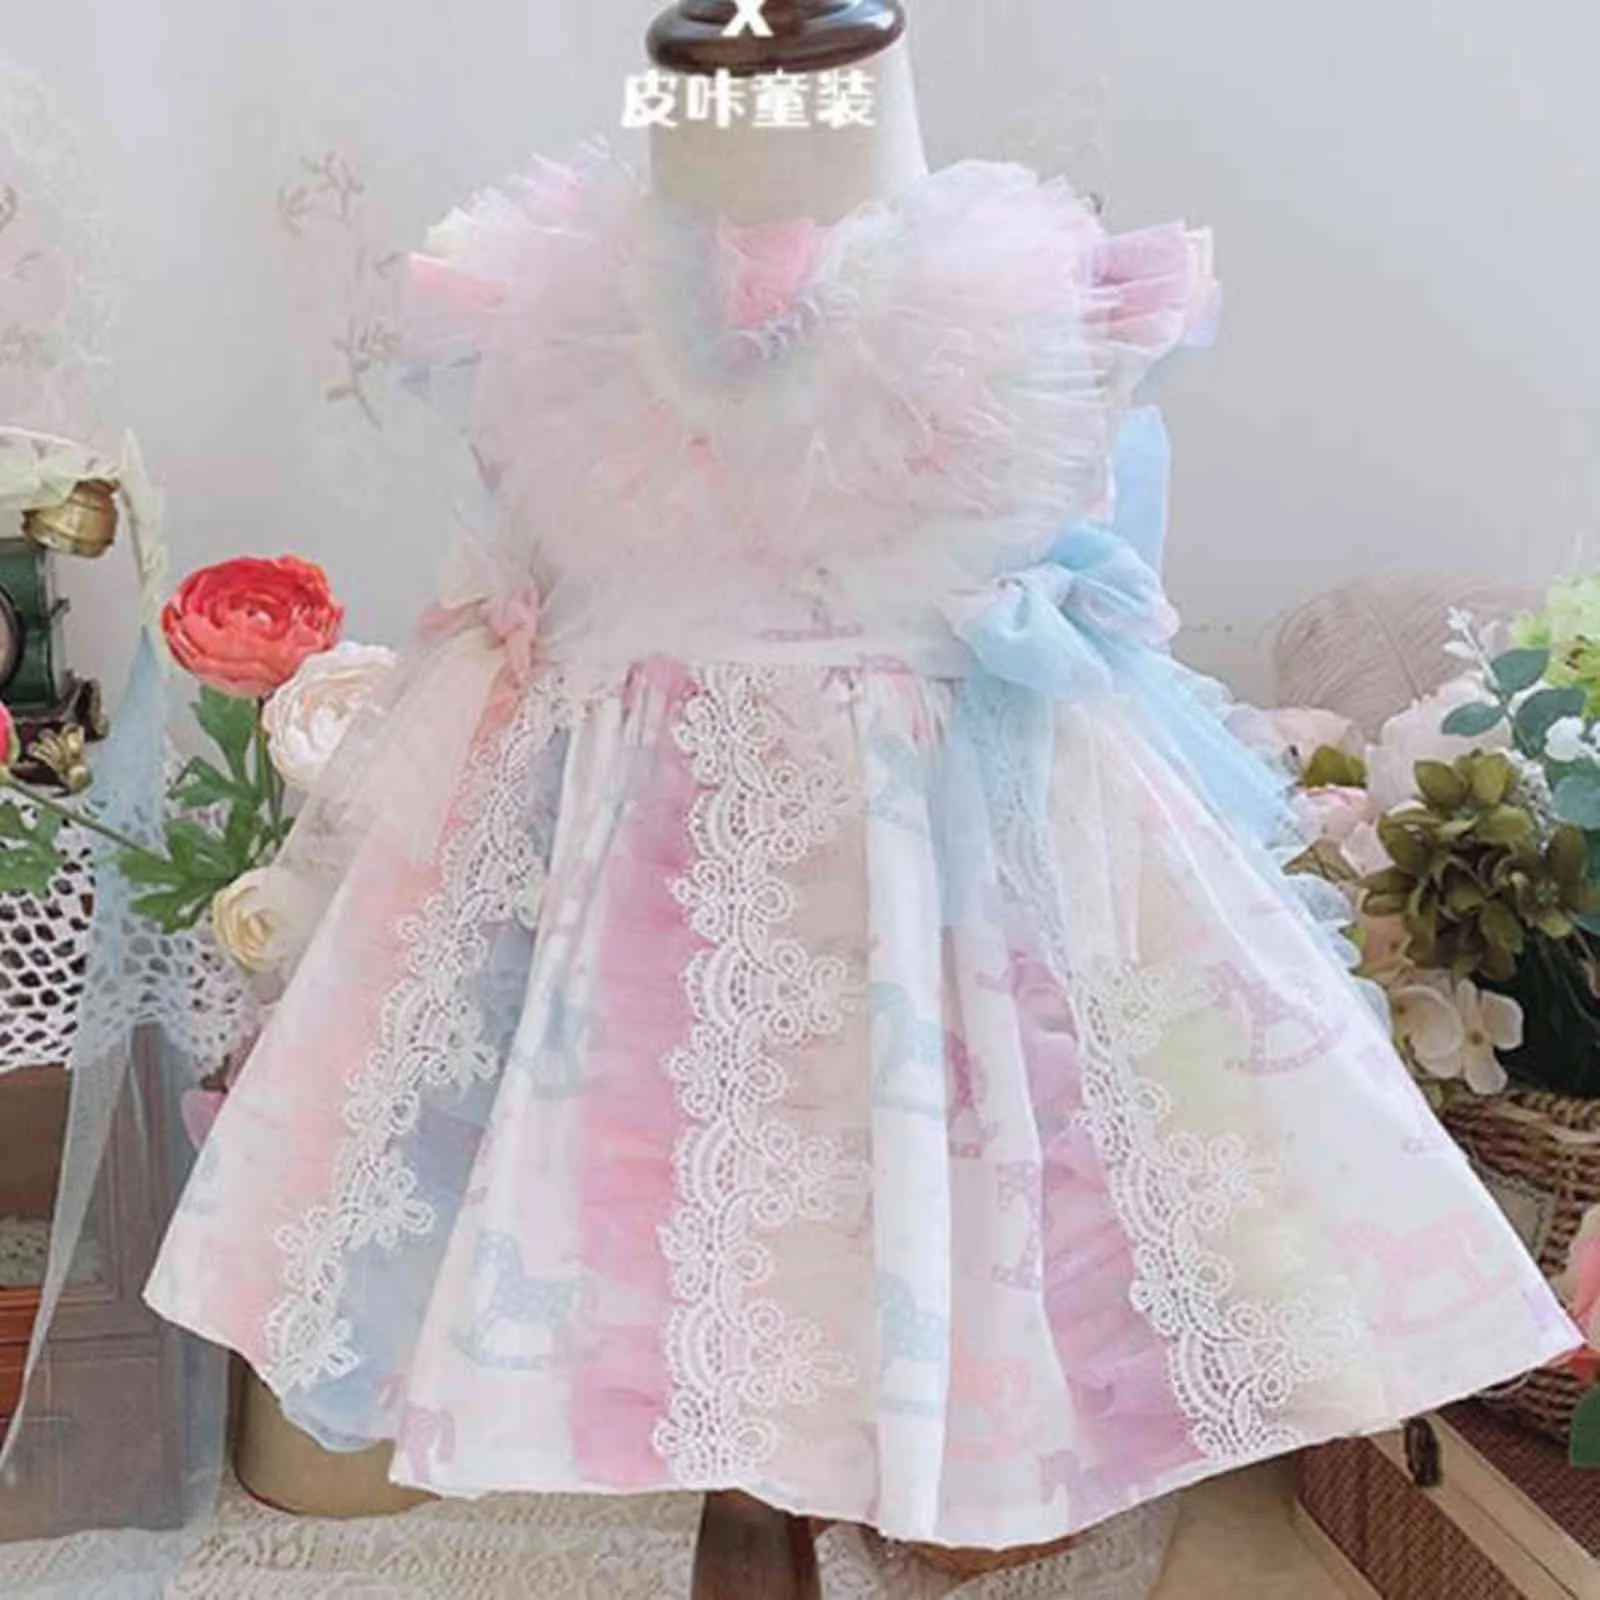 2021 Sommar Vintage Baby Girl Spanish Lolita Princess Dress Kids Casual Lace Mesh Stitching Birthday Party Ball Gown Dress G1129